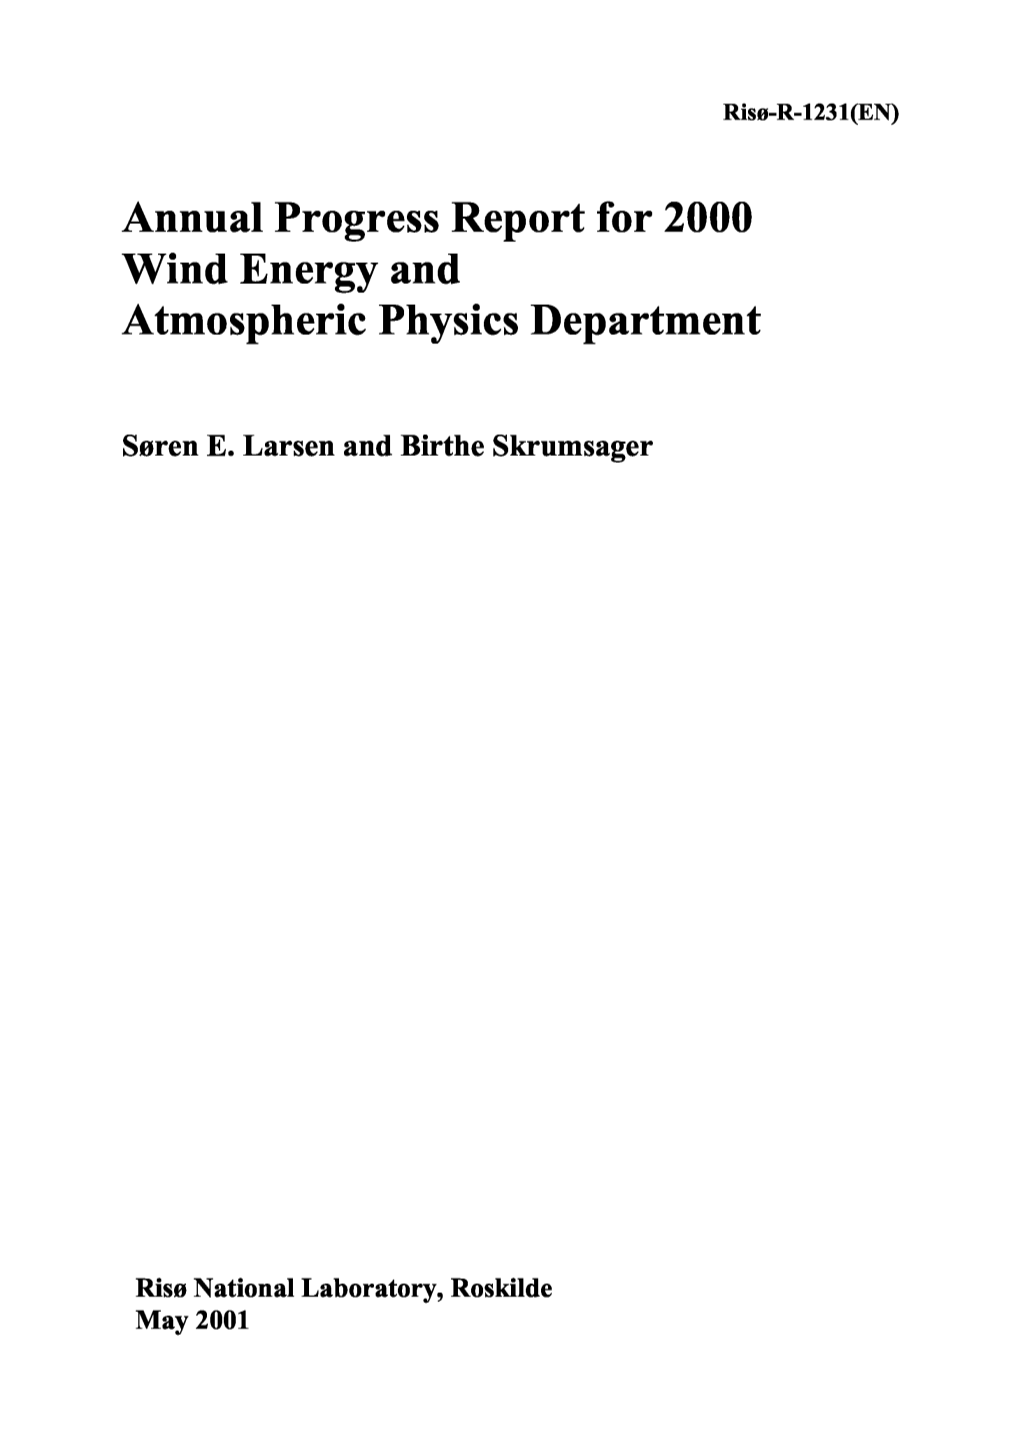 Annual Progress Report for 2000 Wind Energy and Atmospheric Physics Department